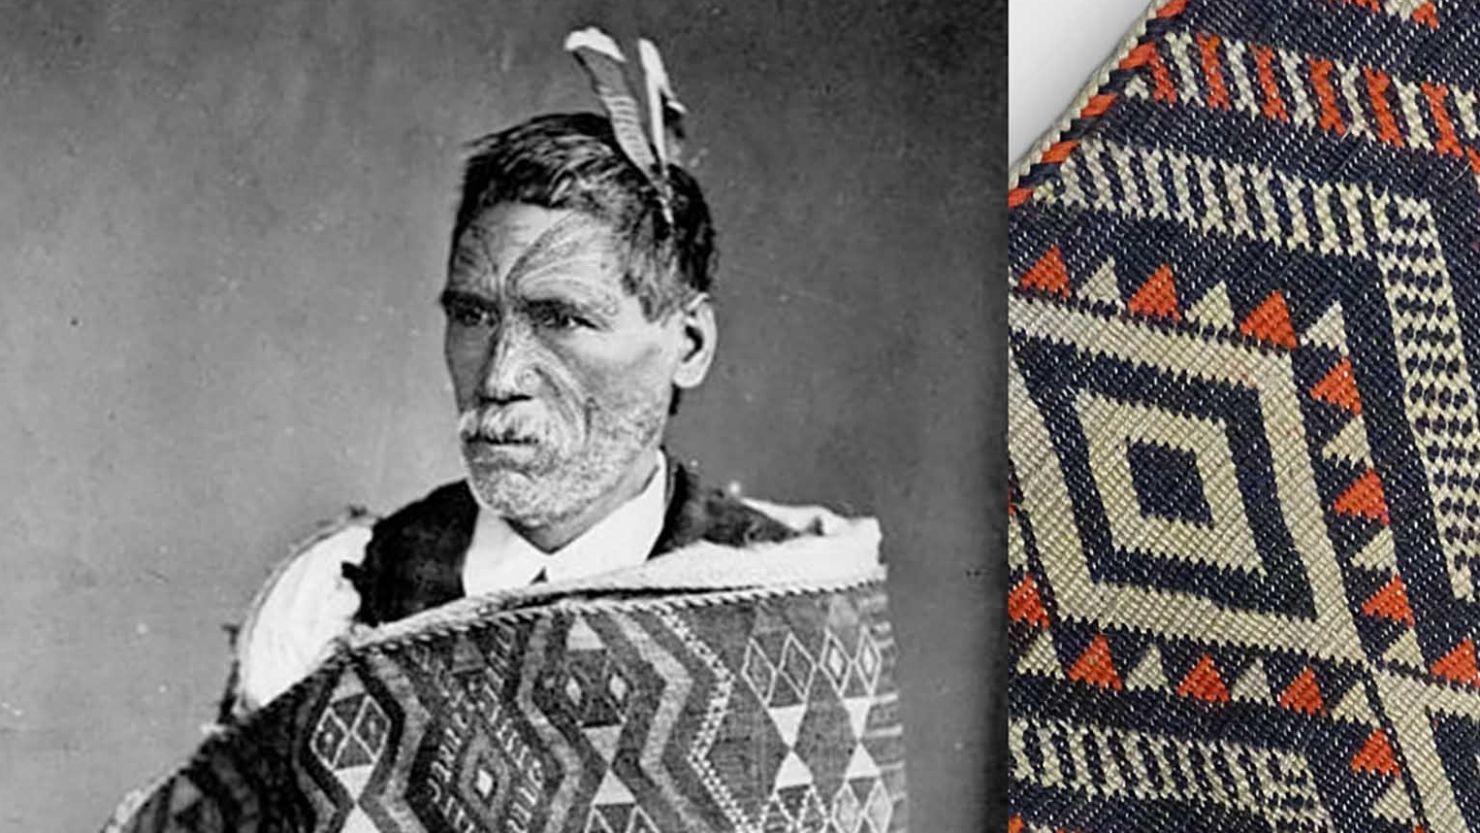 An auction house in Sussex that has been forced to withdraw a Maori shawl that it had listed for sale after receiving abuse and threats about it online